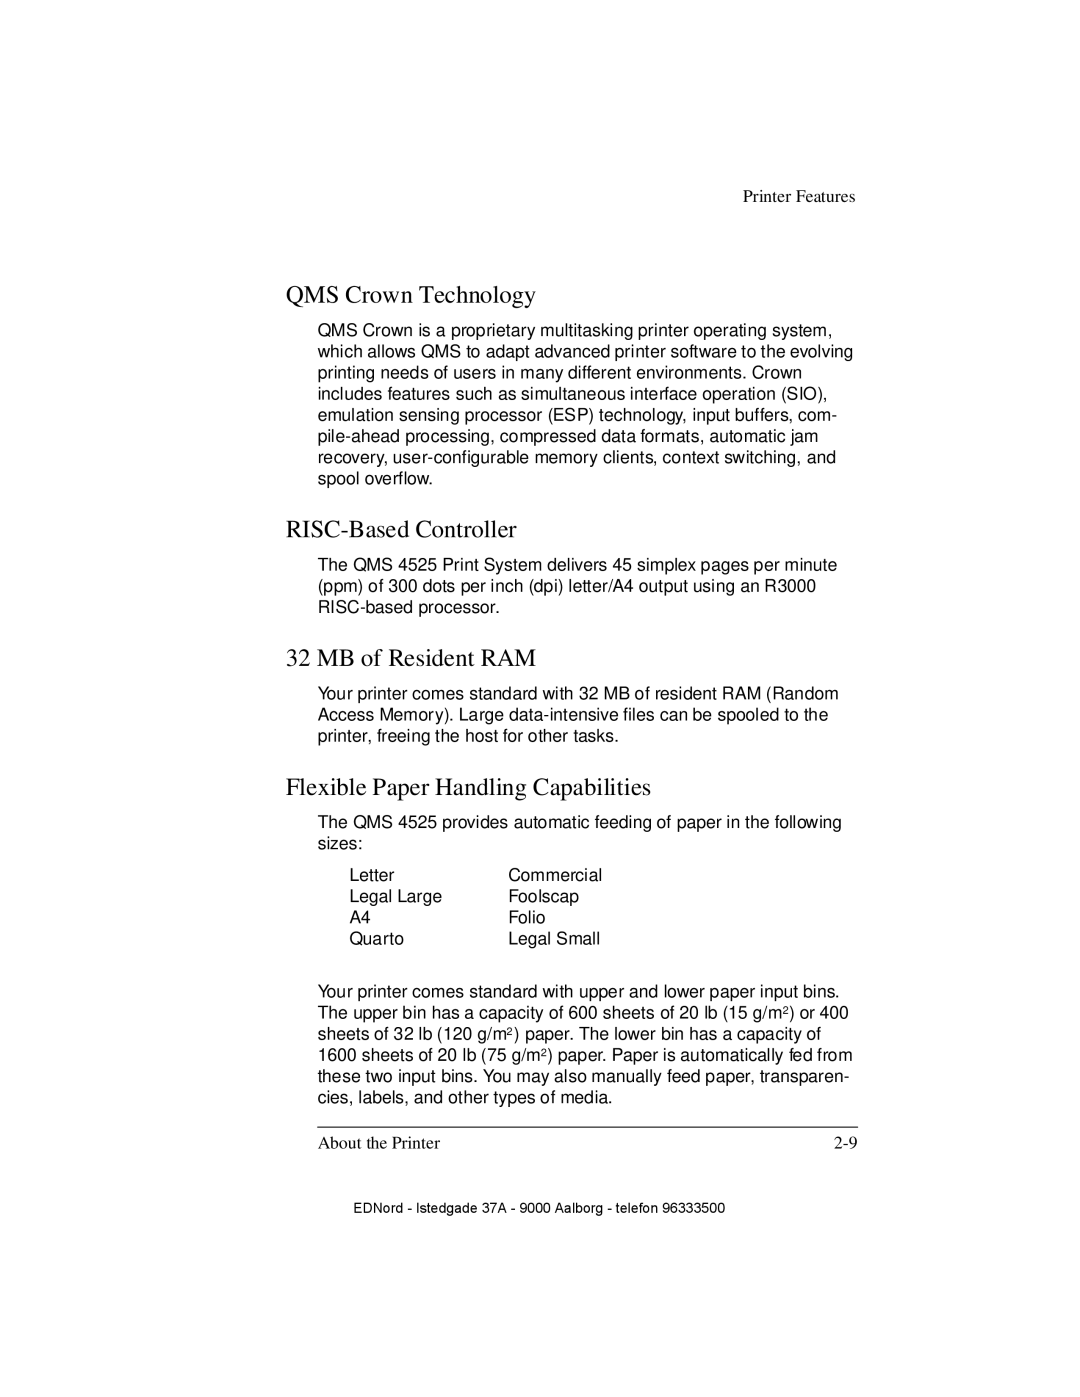 IBM QMS 4525 manual QMS Crown Technology, RISC-Based Controller, MB of Resident RAM, Flexible Paper Handling Capabilities 